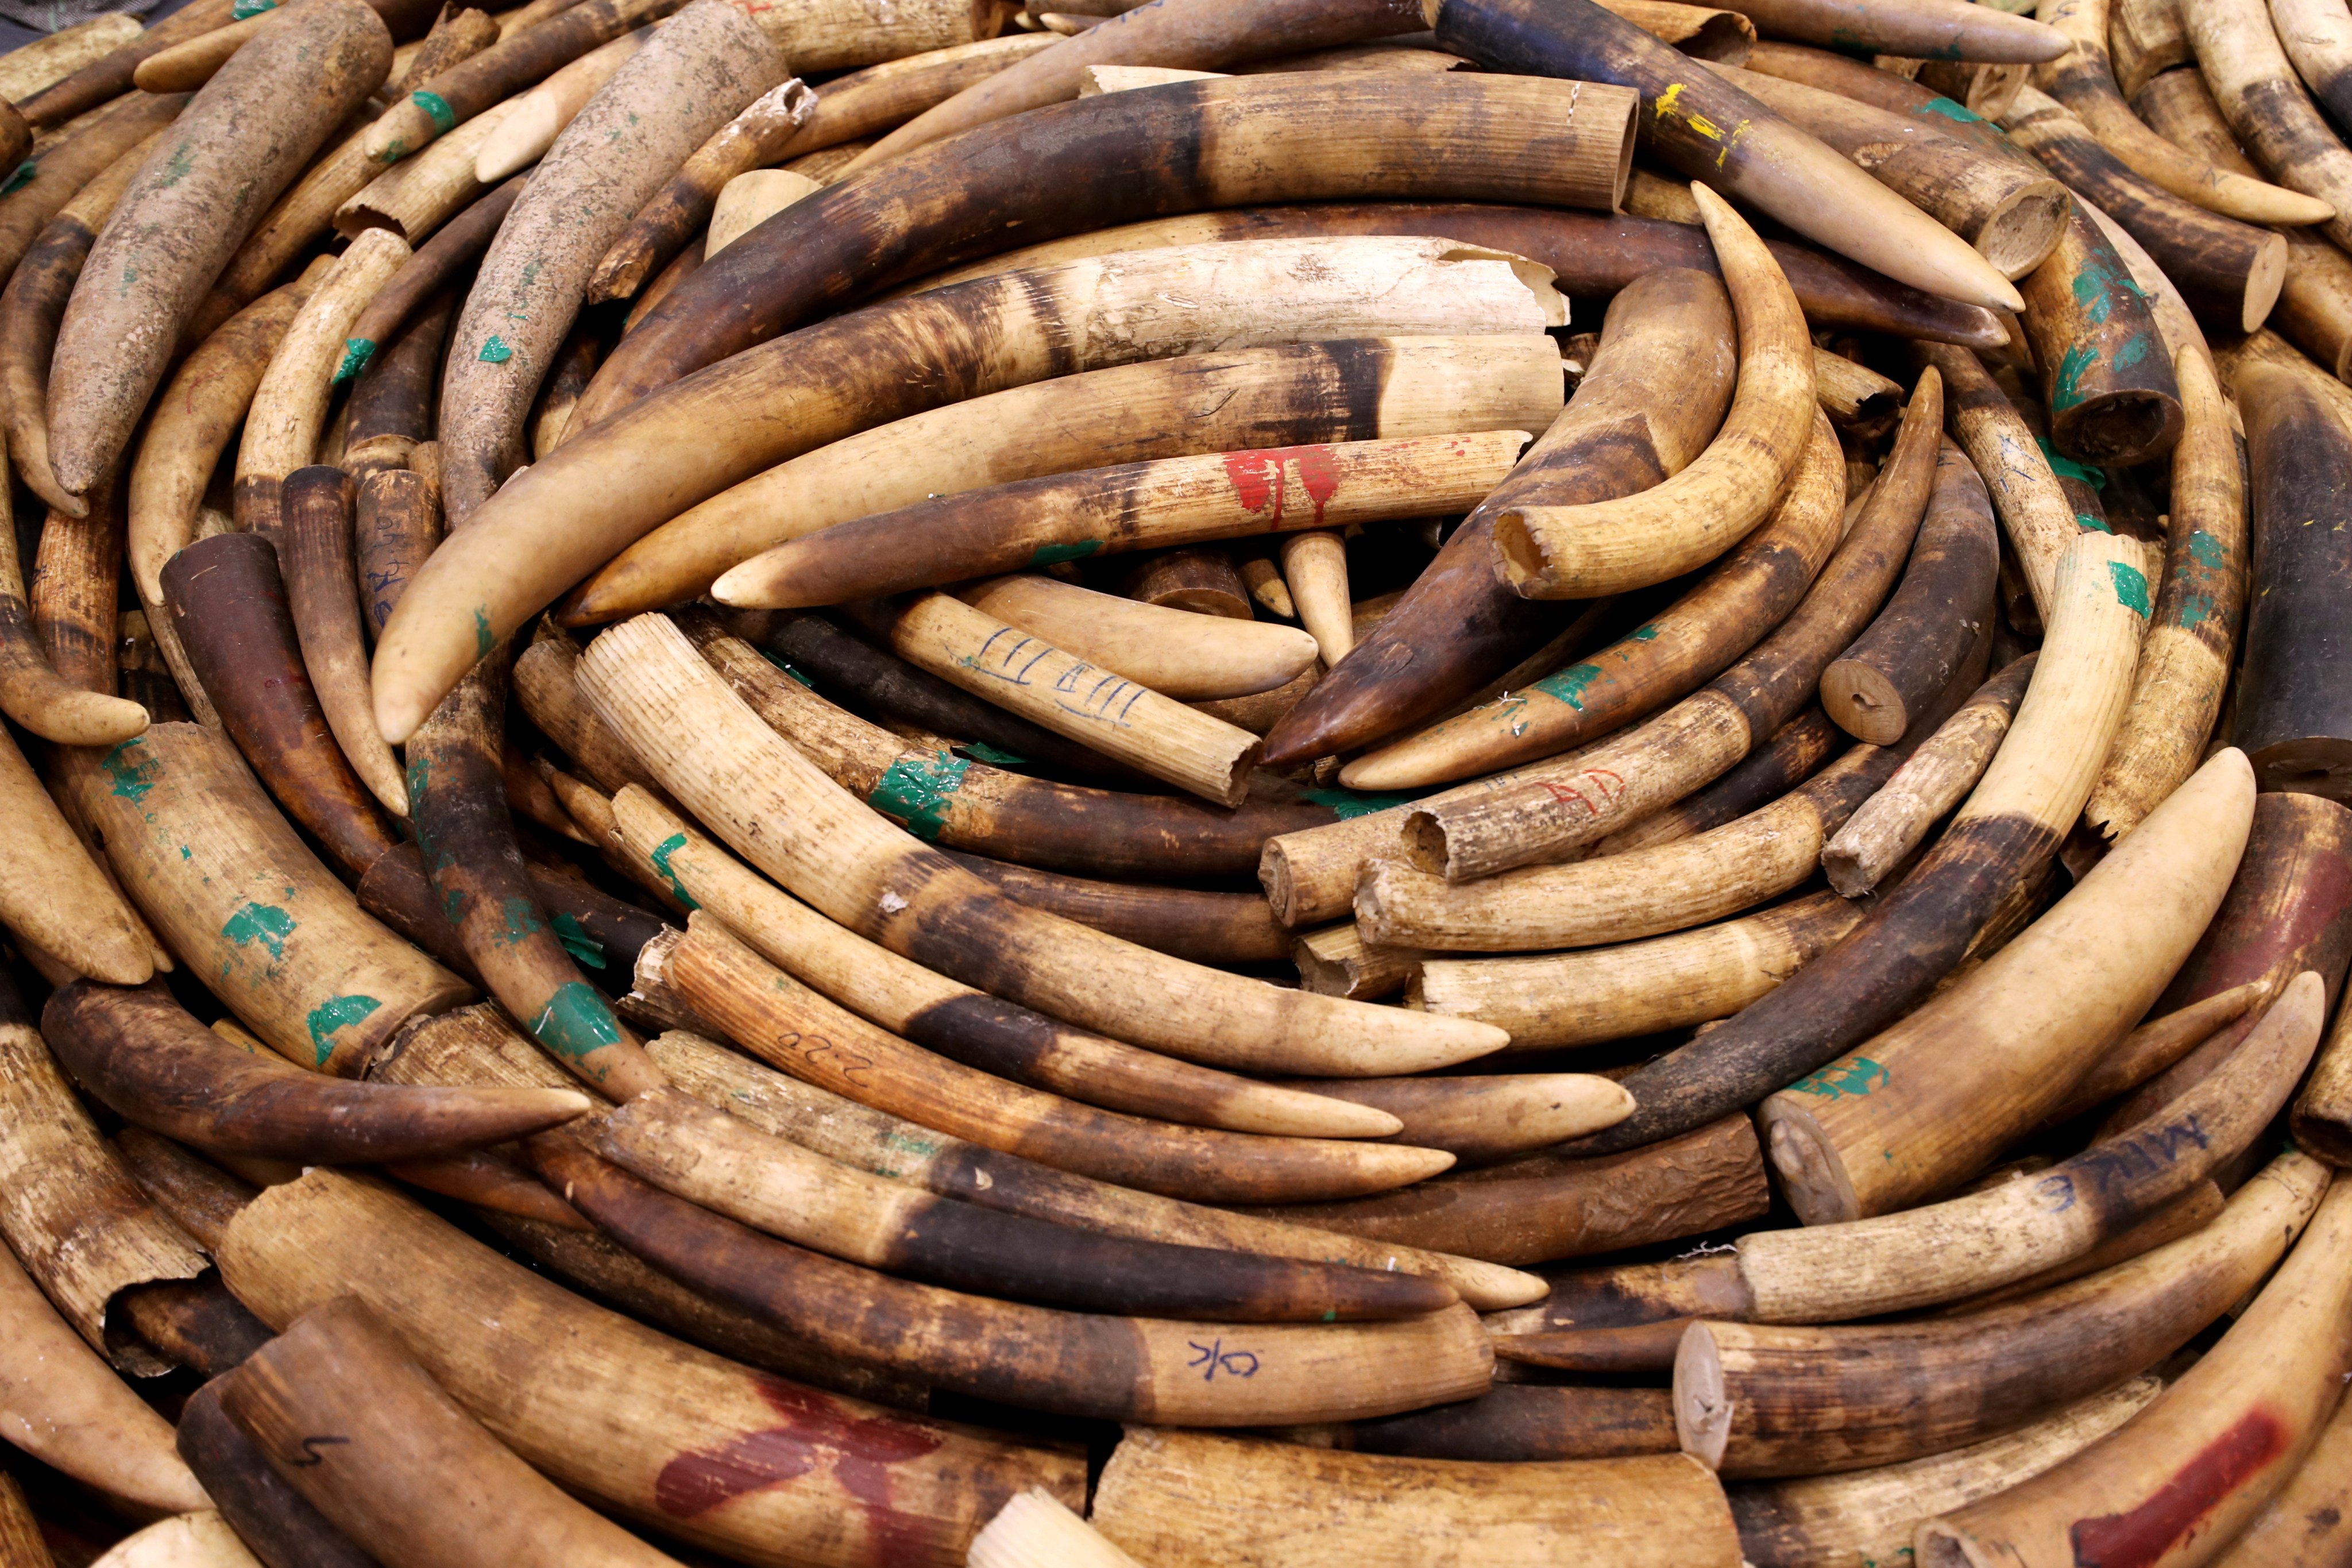 A haul of elephant tusks seized several years ago as part of a crackdown on the cross-border trade in endangered species parts. Photo: Winson Wong.